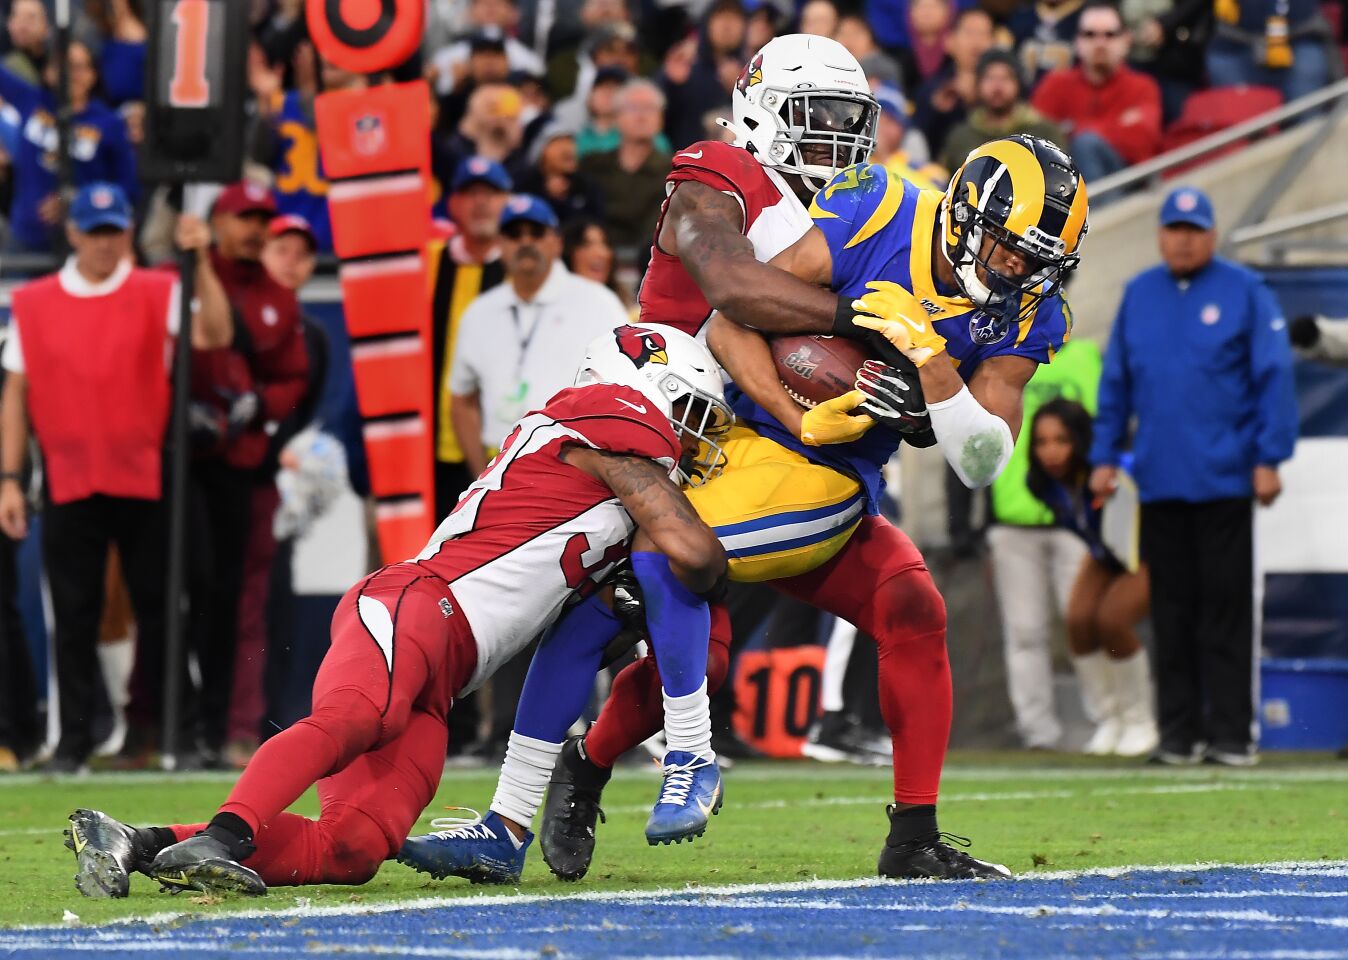 Rams wide receiver Robert Woods catches a touchdown pass in front of Cardinals safety Budda Baker, left, and cornerback Patrick Peterson.